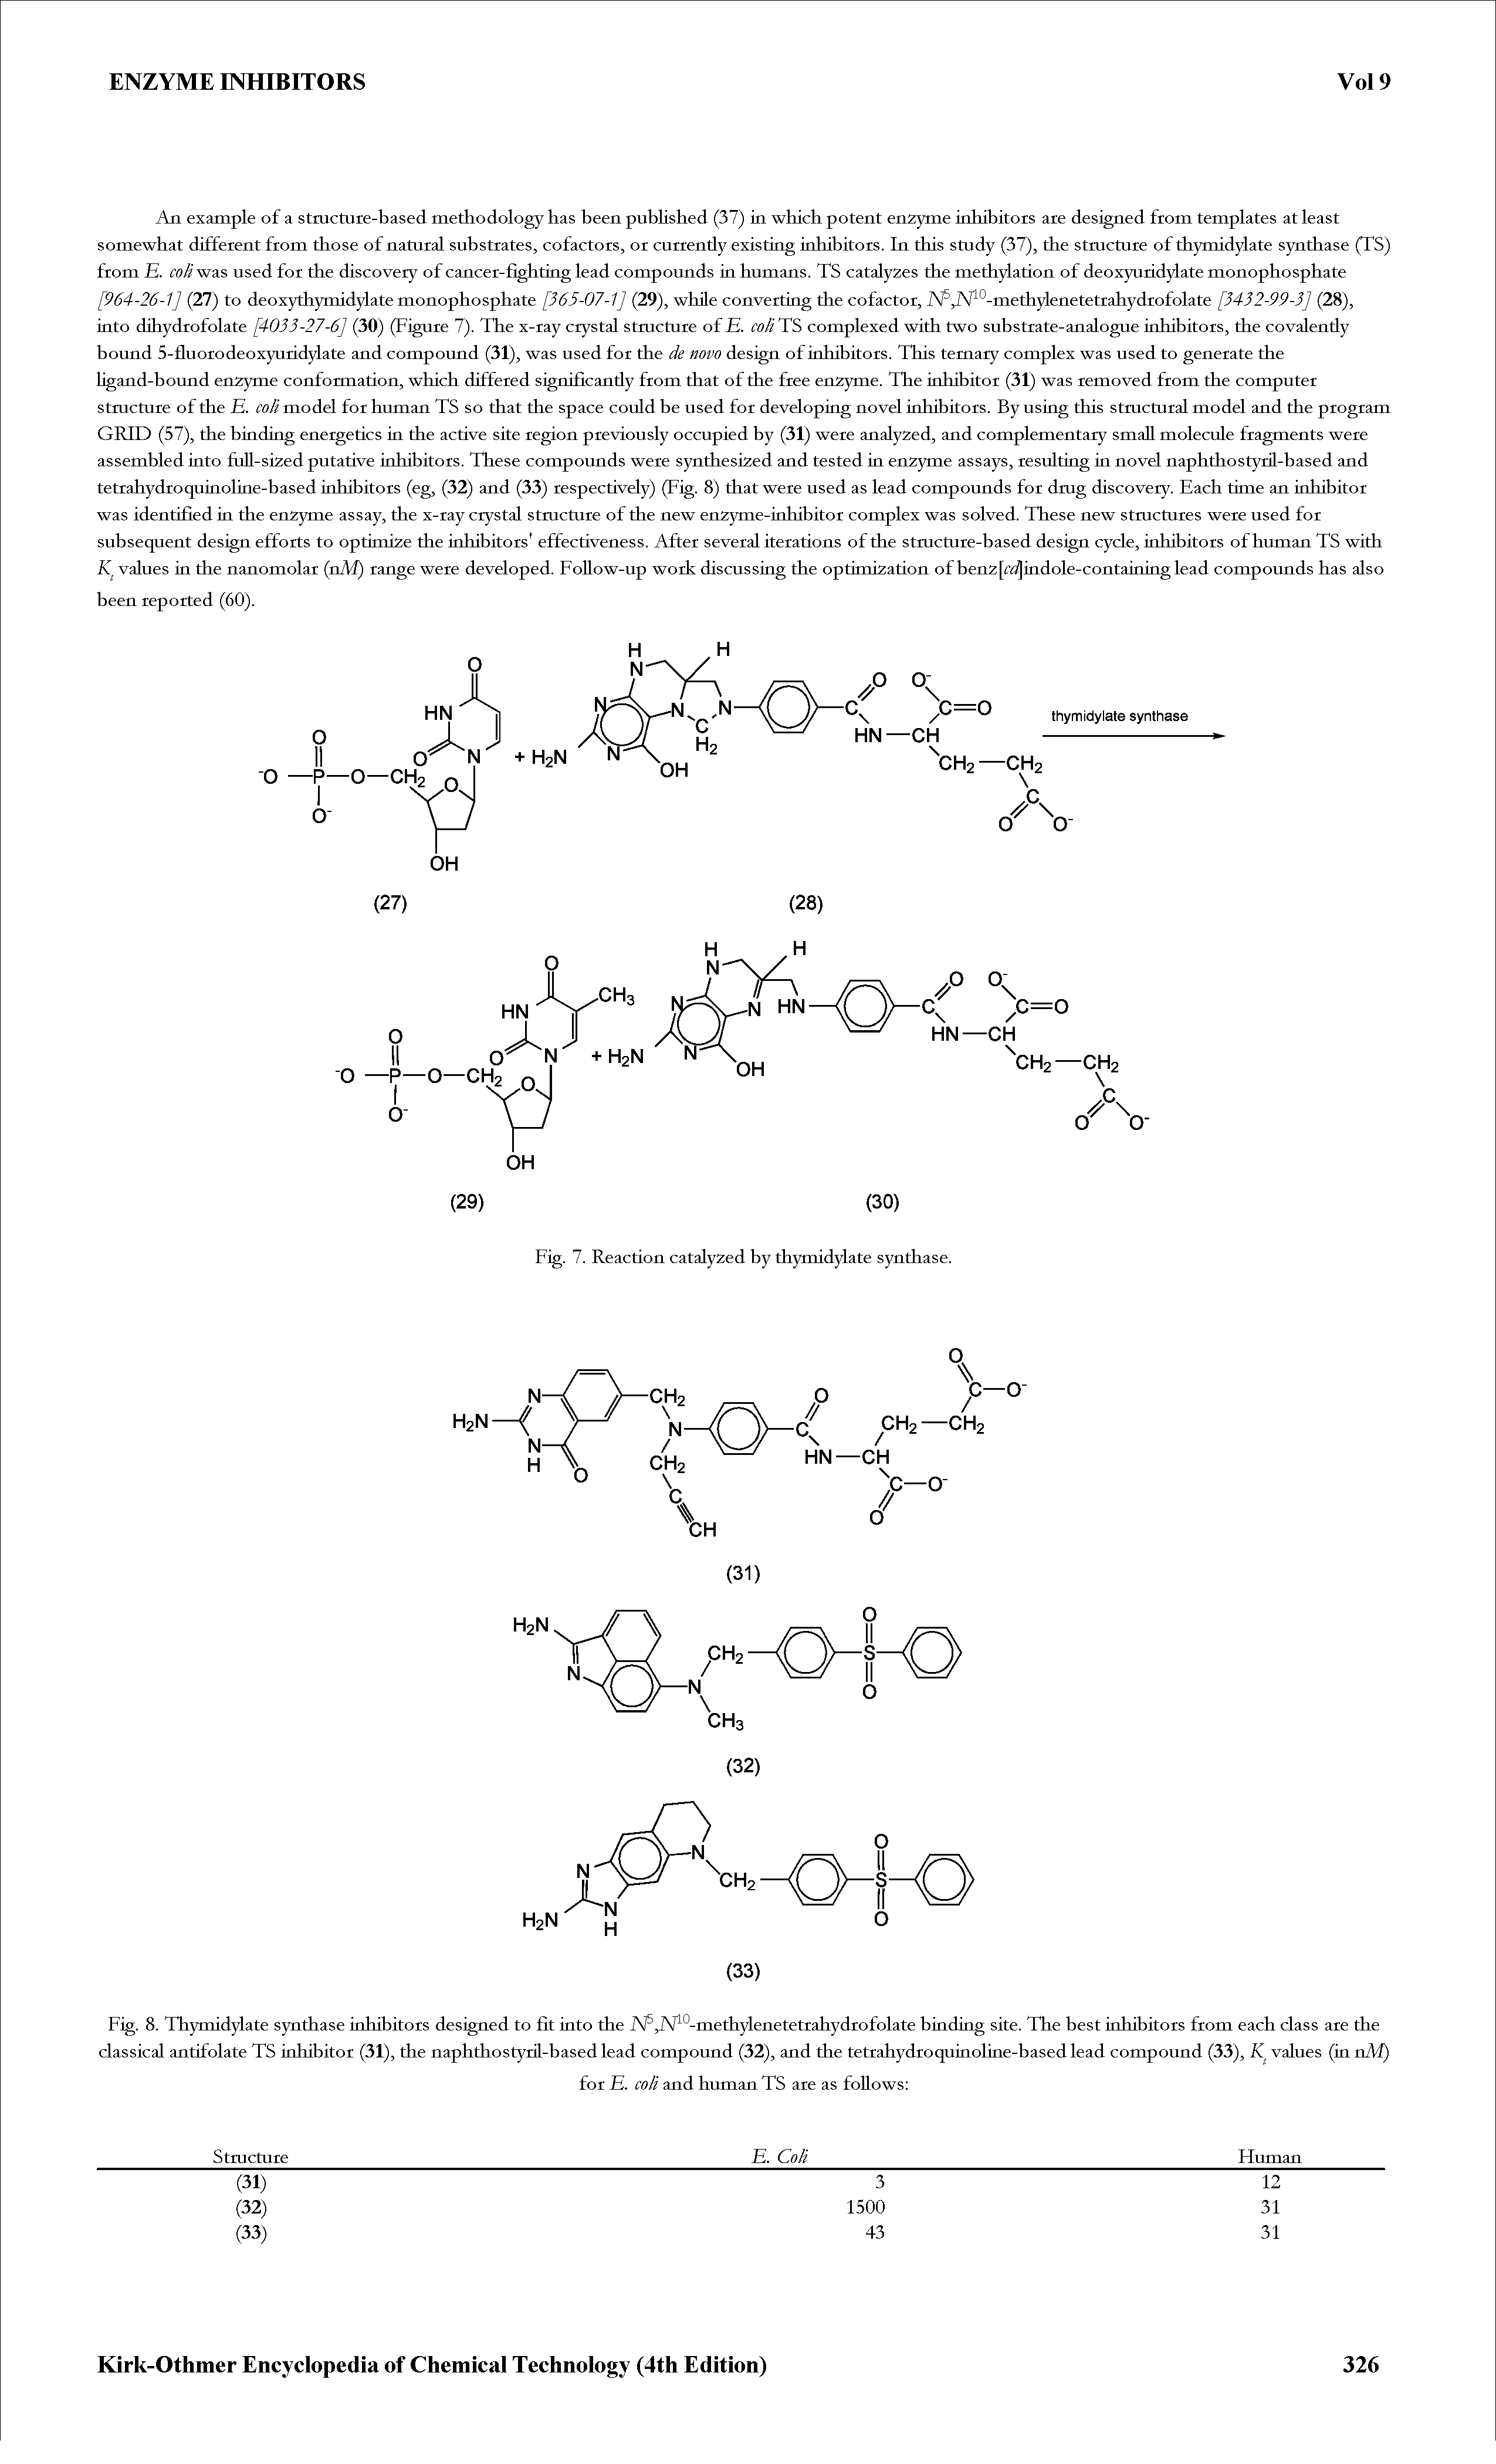 Fig. 8. Thymidylate synthase inhibitors designed to fit into the A/, AJ -methylenetetrahydrofolate binding site. The best inhibitors from each class are the classical antifolate TS inhibitor (31), the naphthostyril-based lead compound (32), and the tetrahydroquinoline-based lead compound (33), iC values (in nAI)...